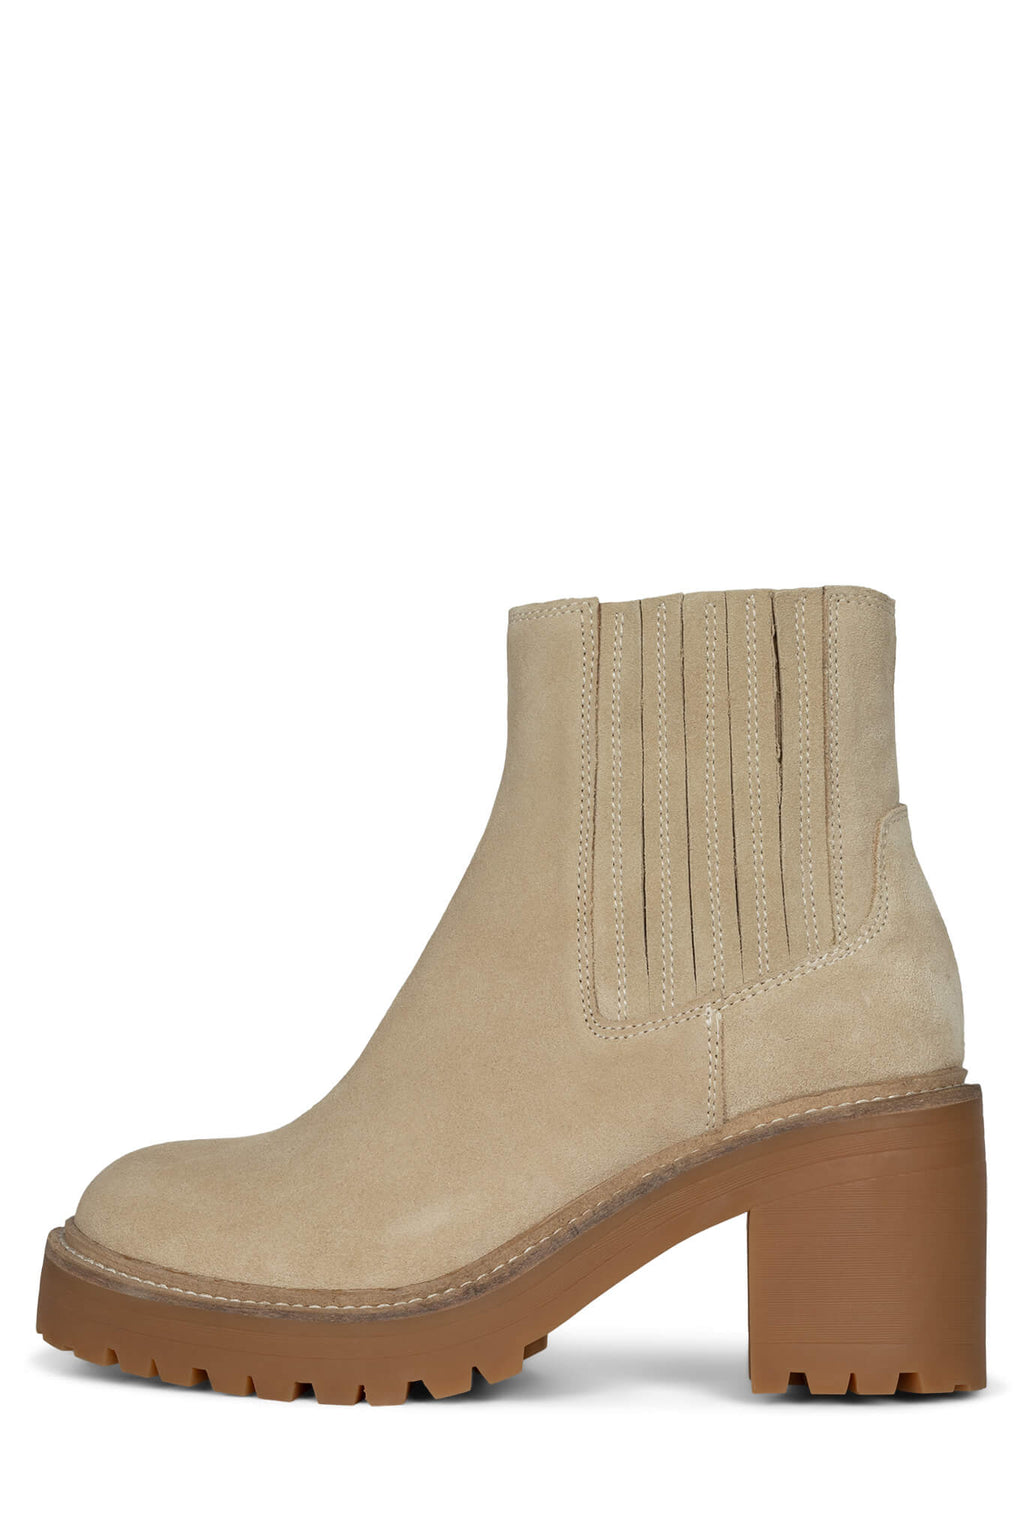 TUCKEE Jeffrey Campbell Sand Suede 6 